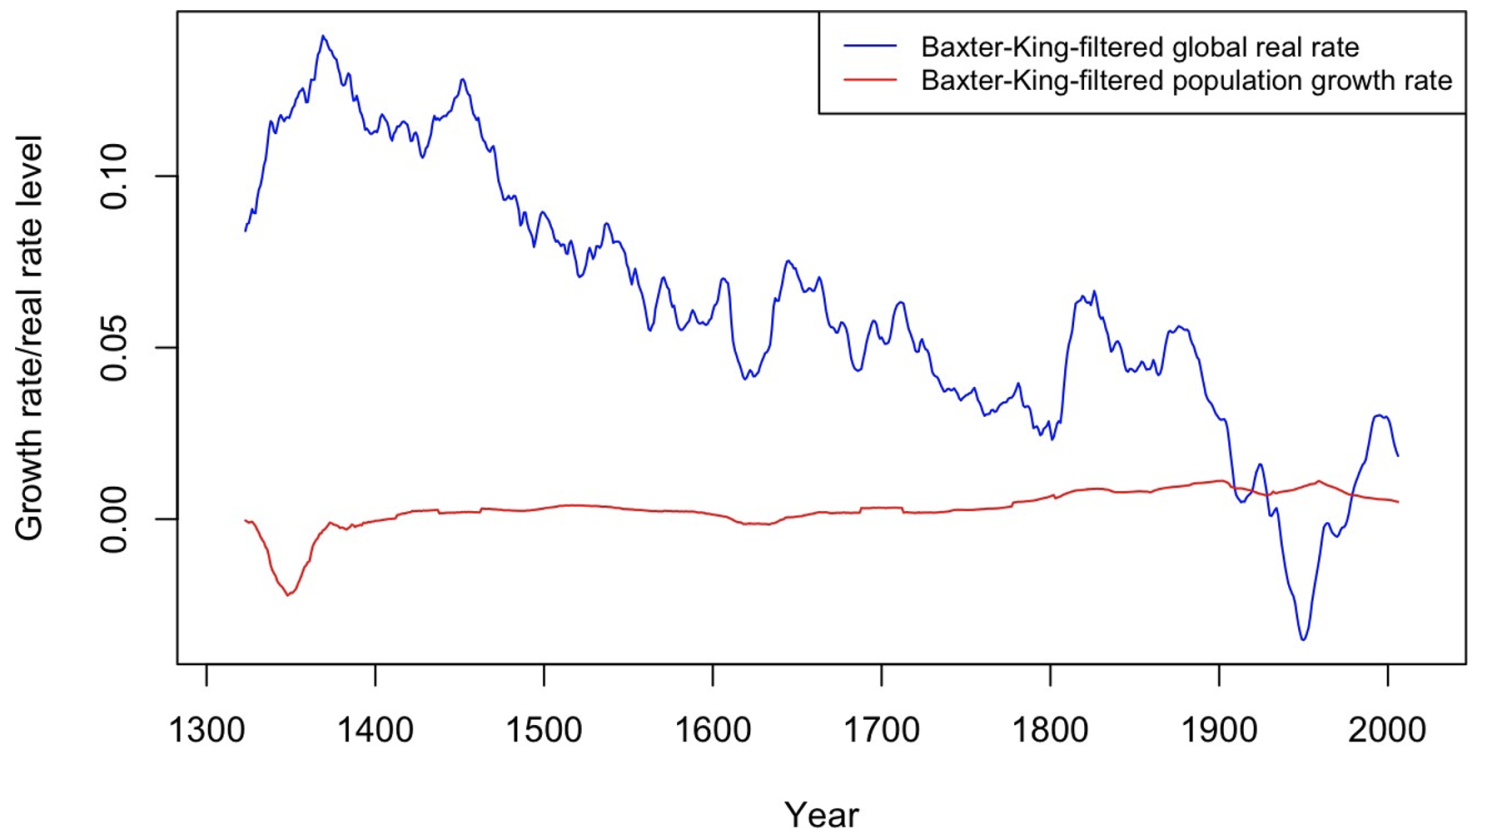 Figure 1 The global real interest rate versus its Baxter-King-filtered long-run trend, 1311-2021